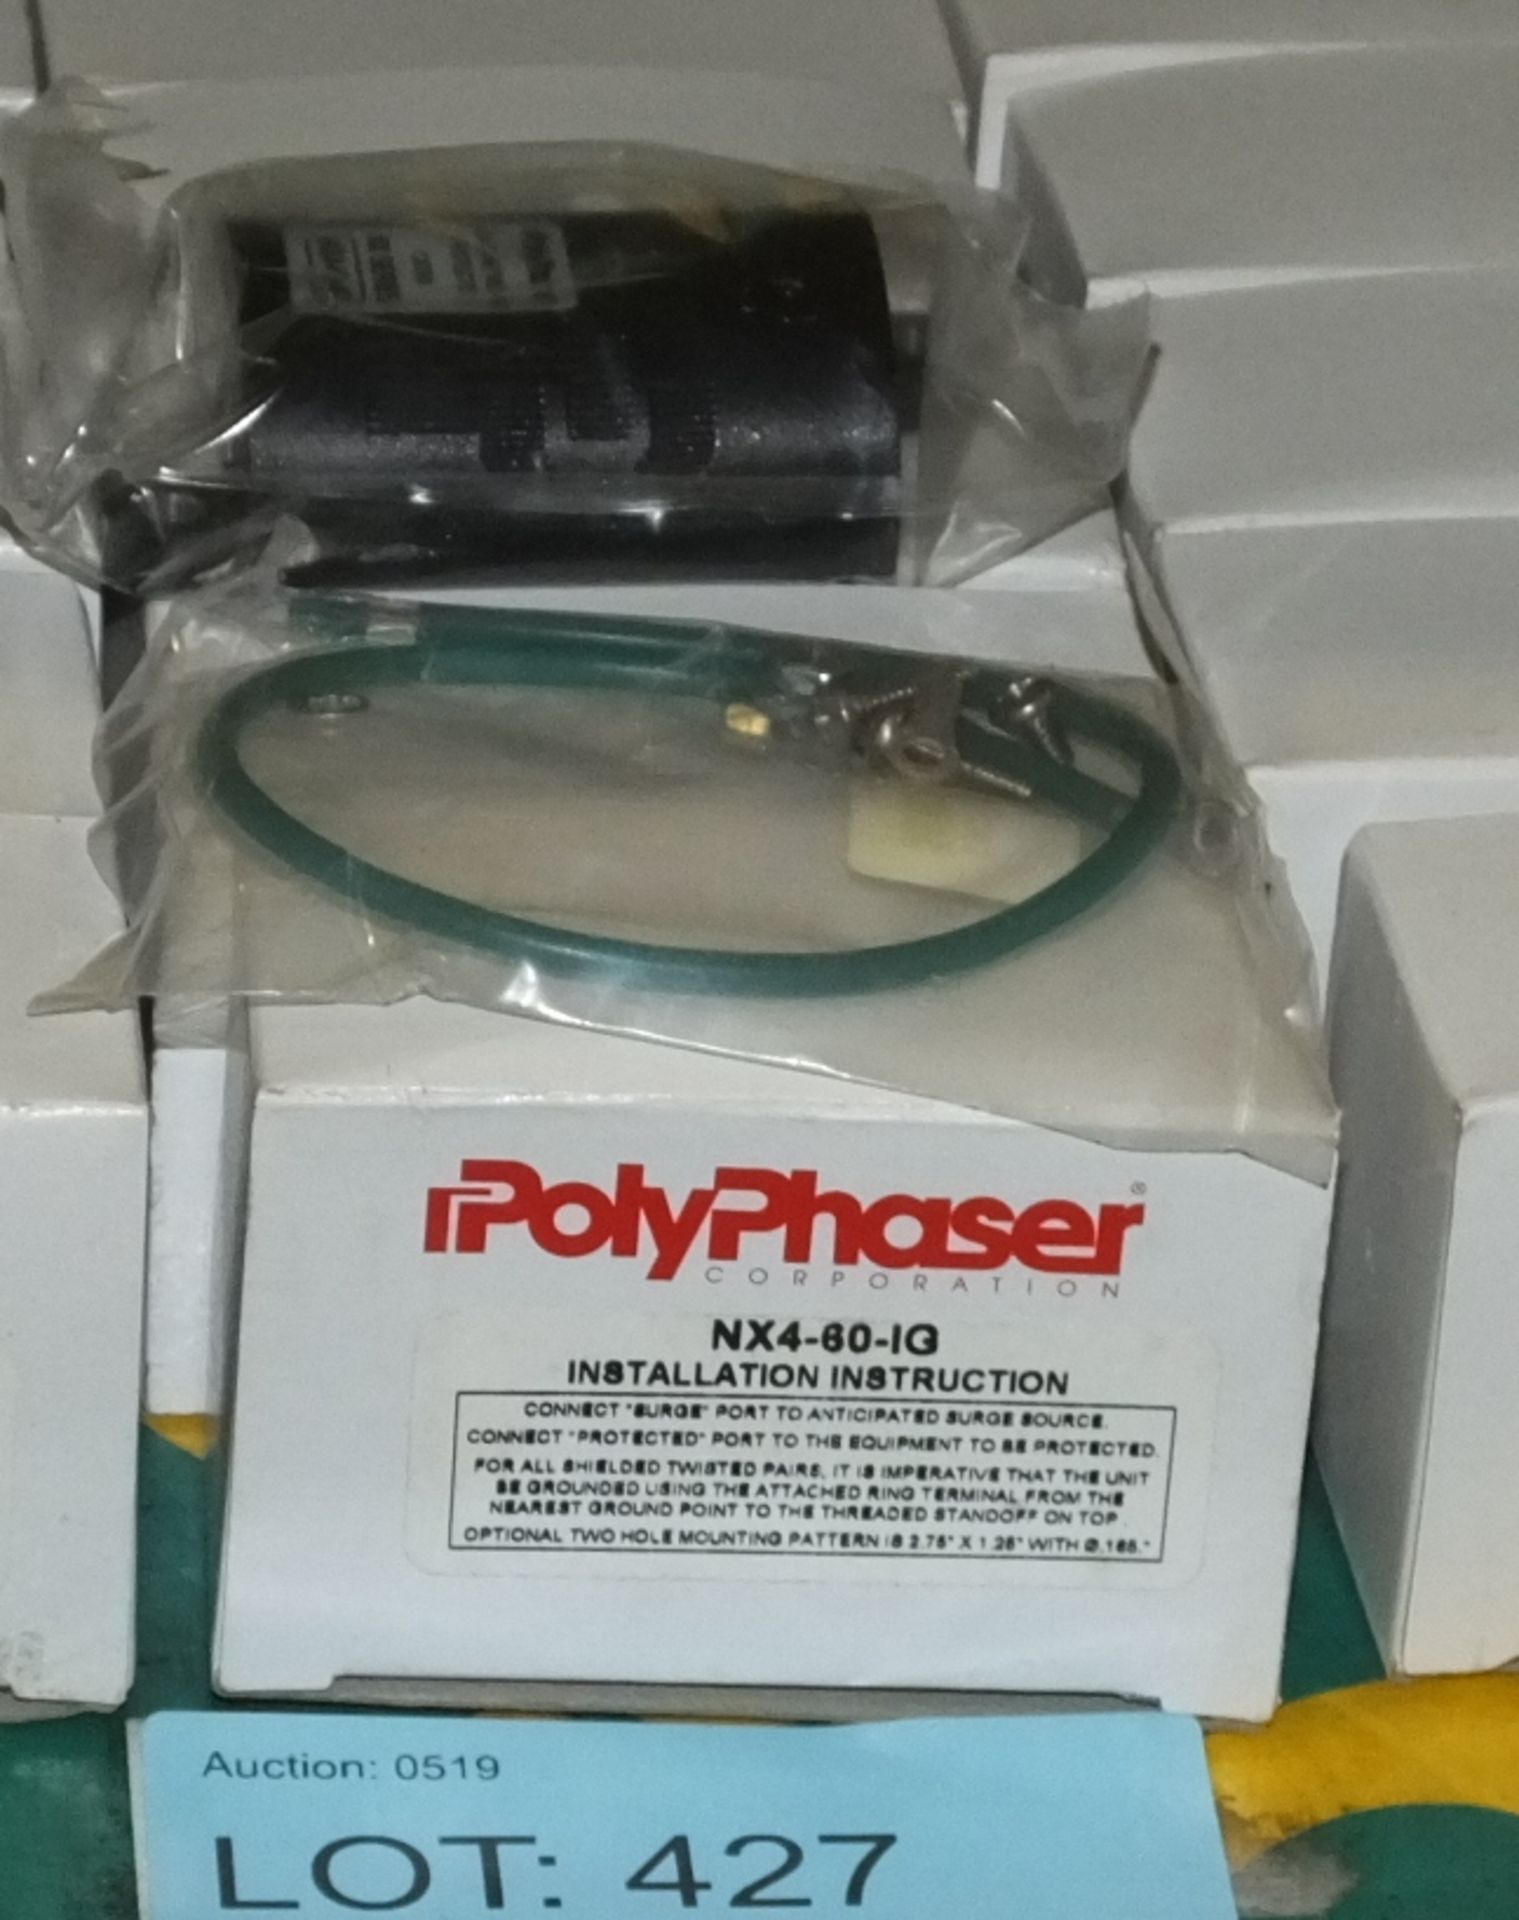 30x Polyphaser NX4-60-IG Data Network Protectors - Image 2 of 2